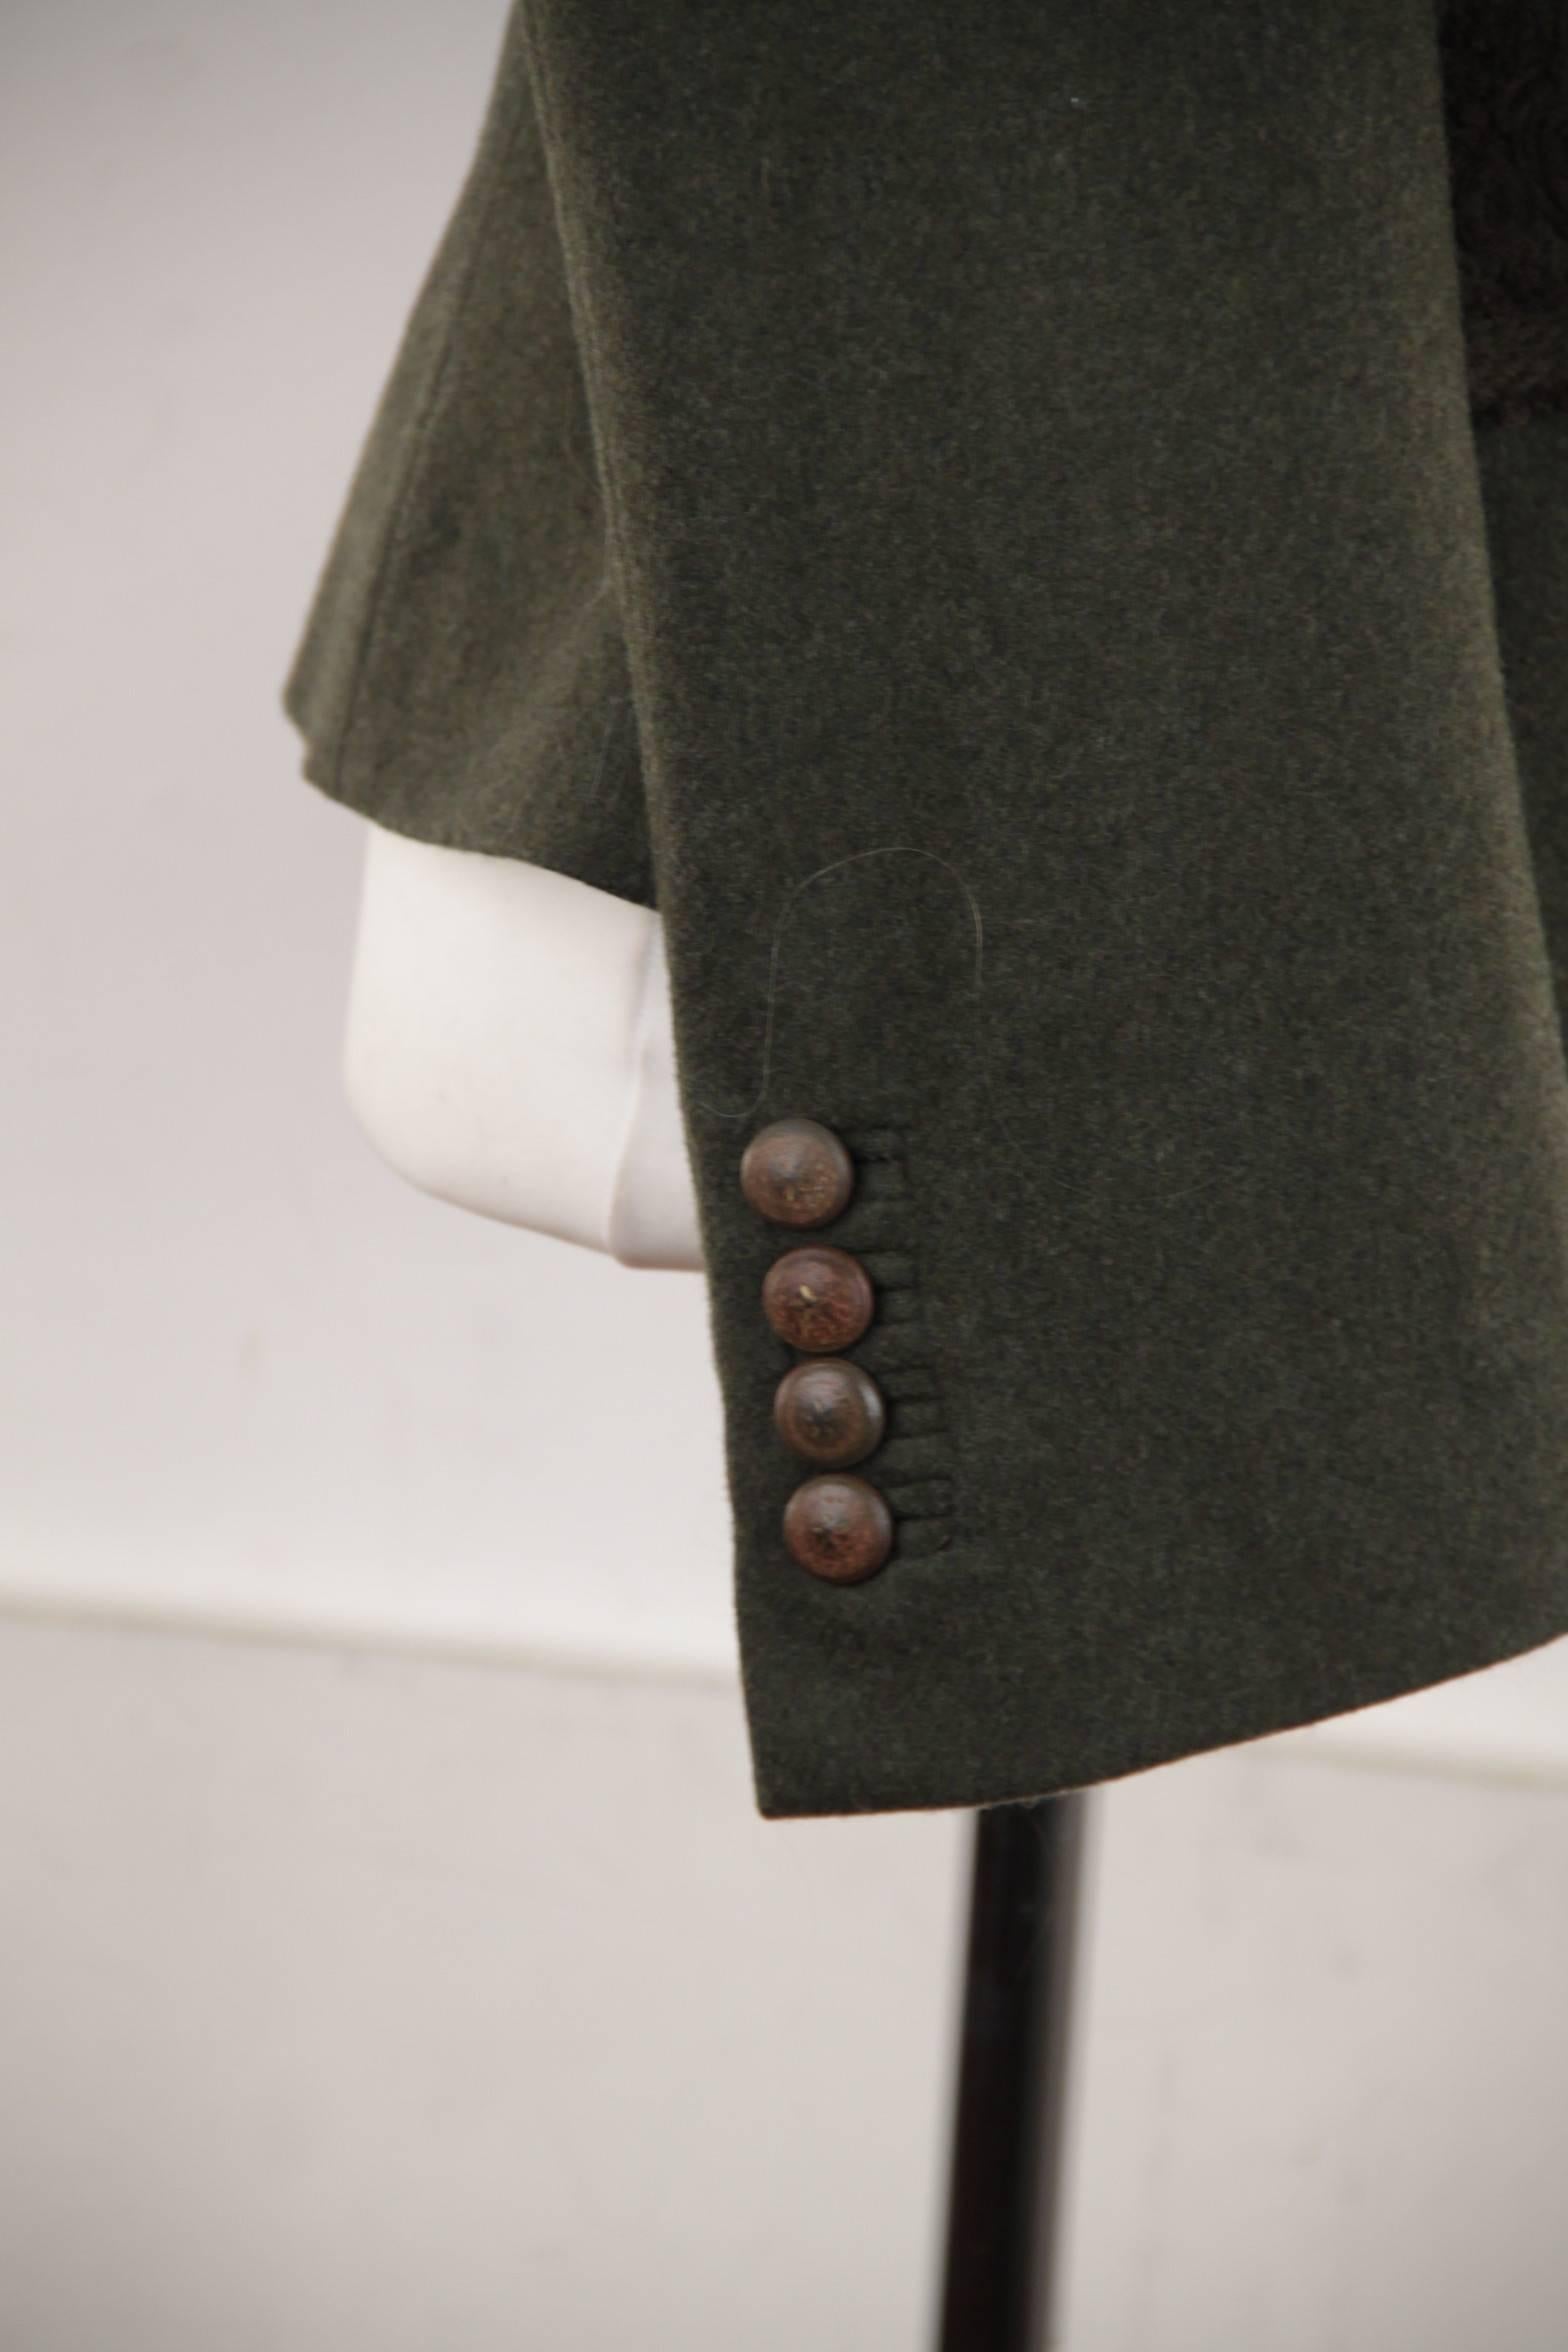 

- Composition: 100% Wool

- Loden fabric

- Embroidery on the front and on the flap

- Long sleeve styling

- Button closure on the front

- Silk Lining

- 2 flap pockets on the waist

- Green color
- Size: 44 IT (The size shown